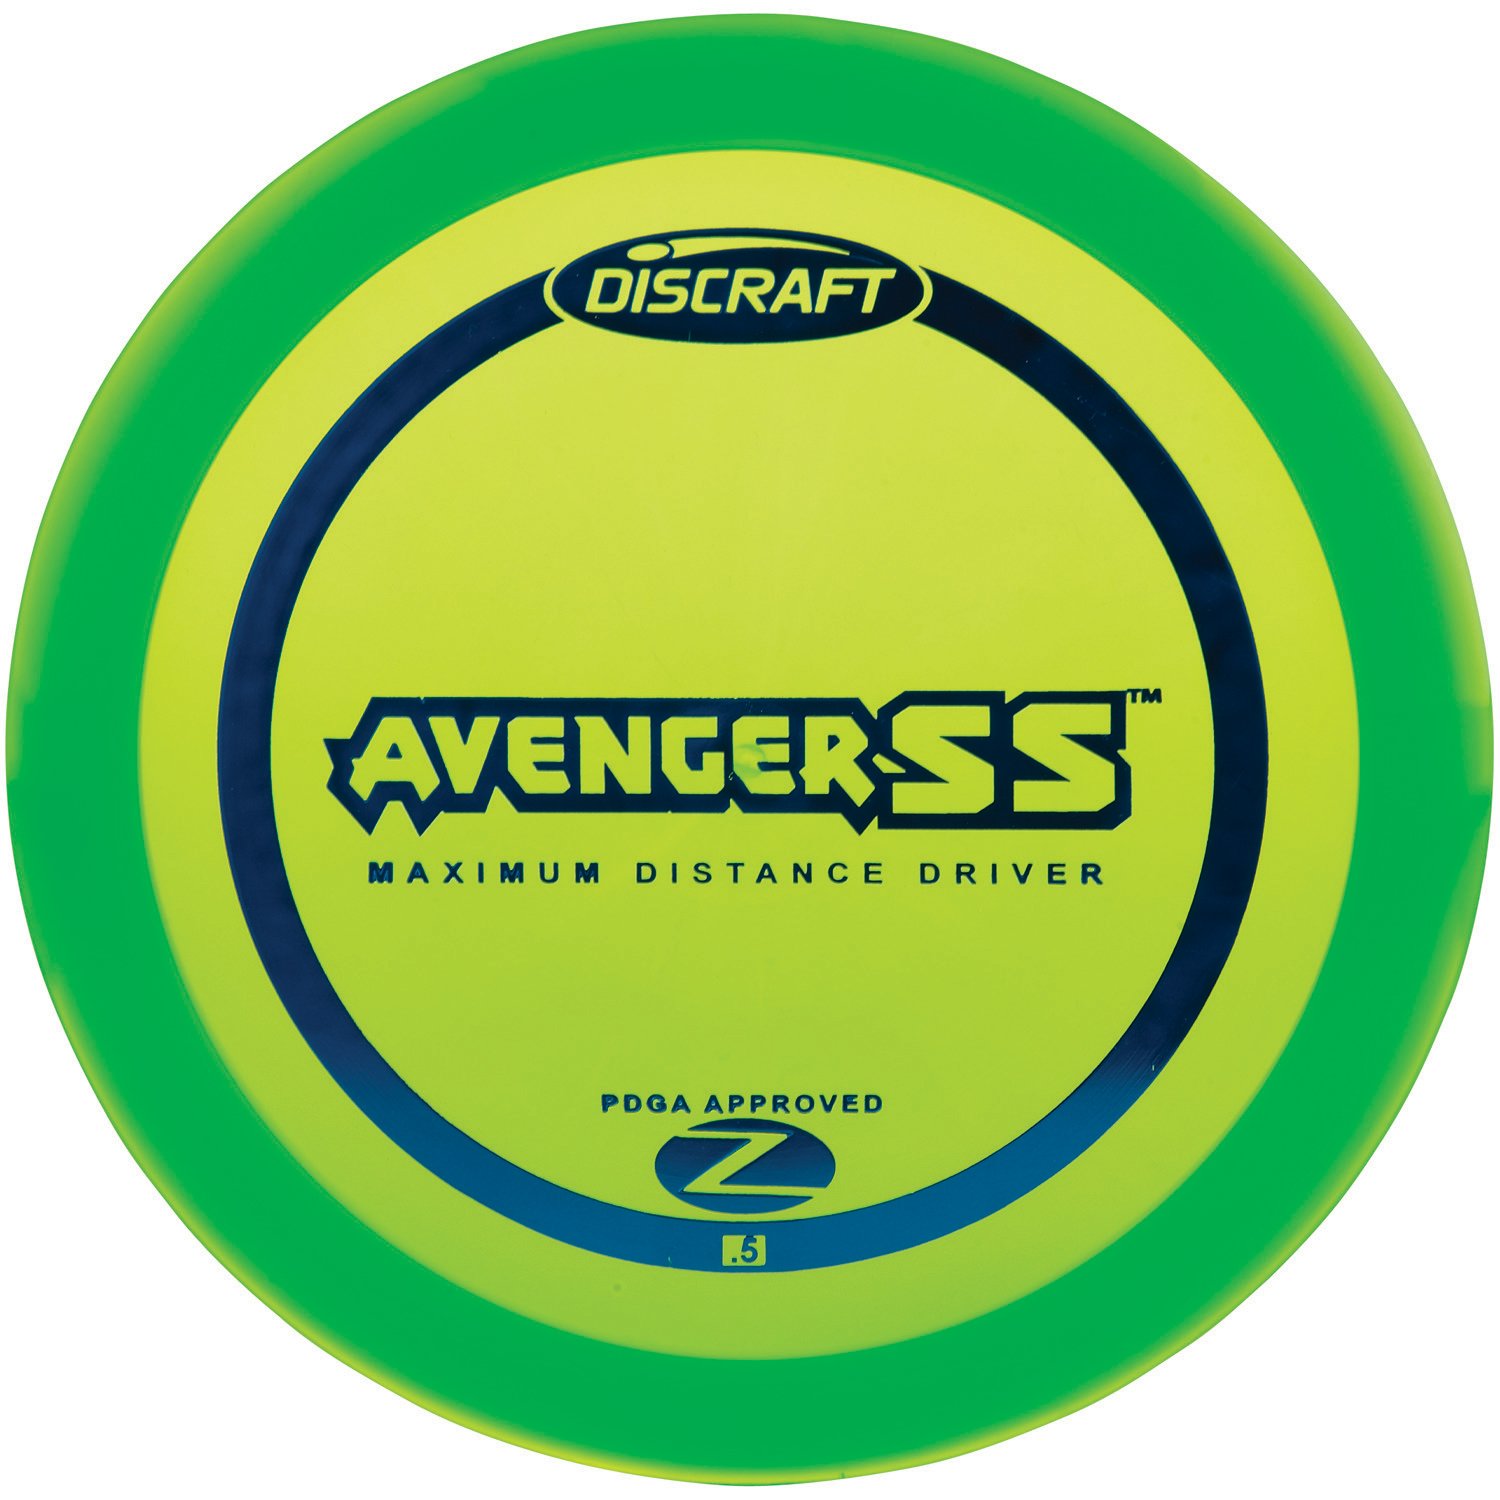 Discraft Avenger SS™ Z Disc Golf Driver                                                                                        - view number 1 selected